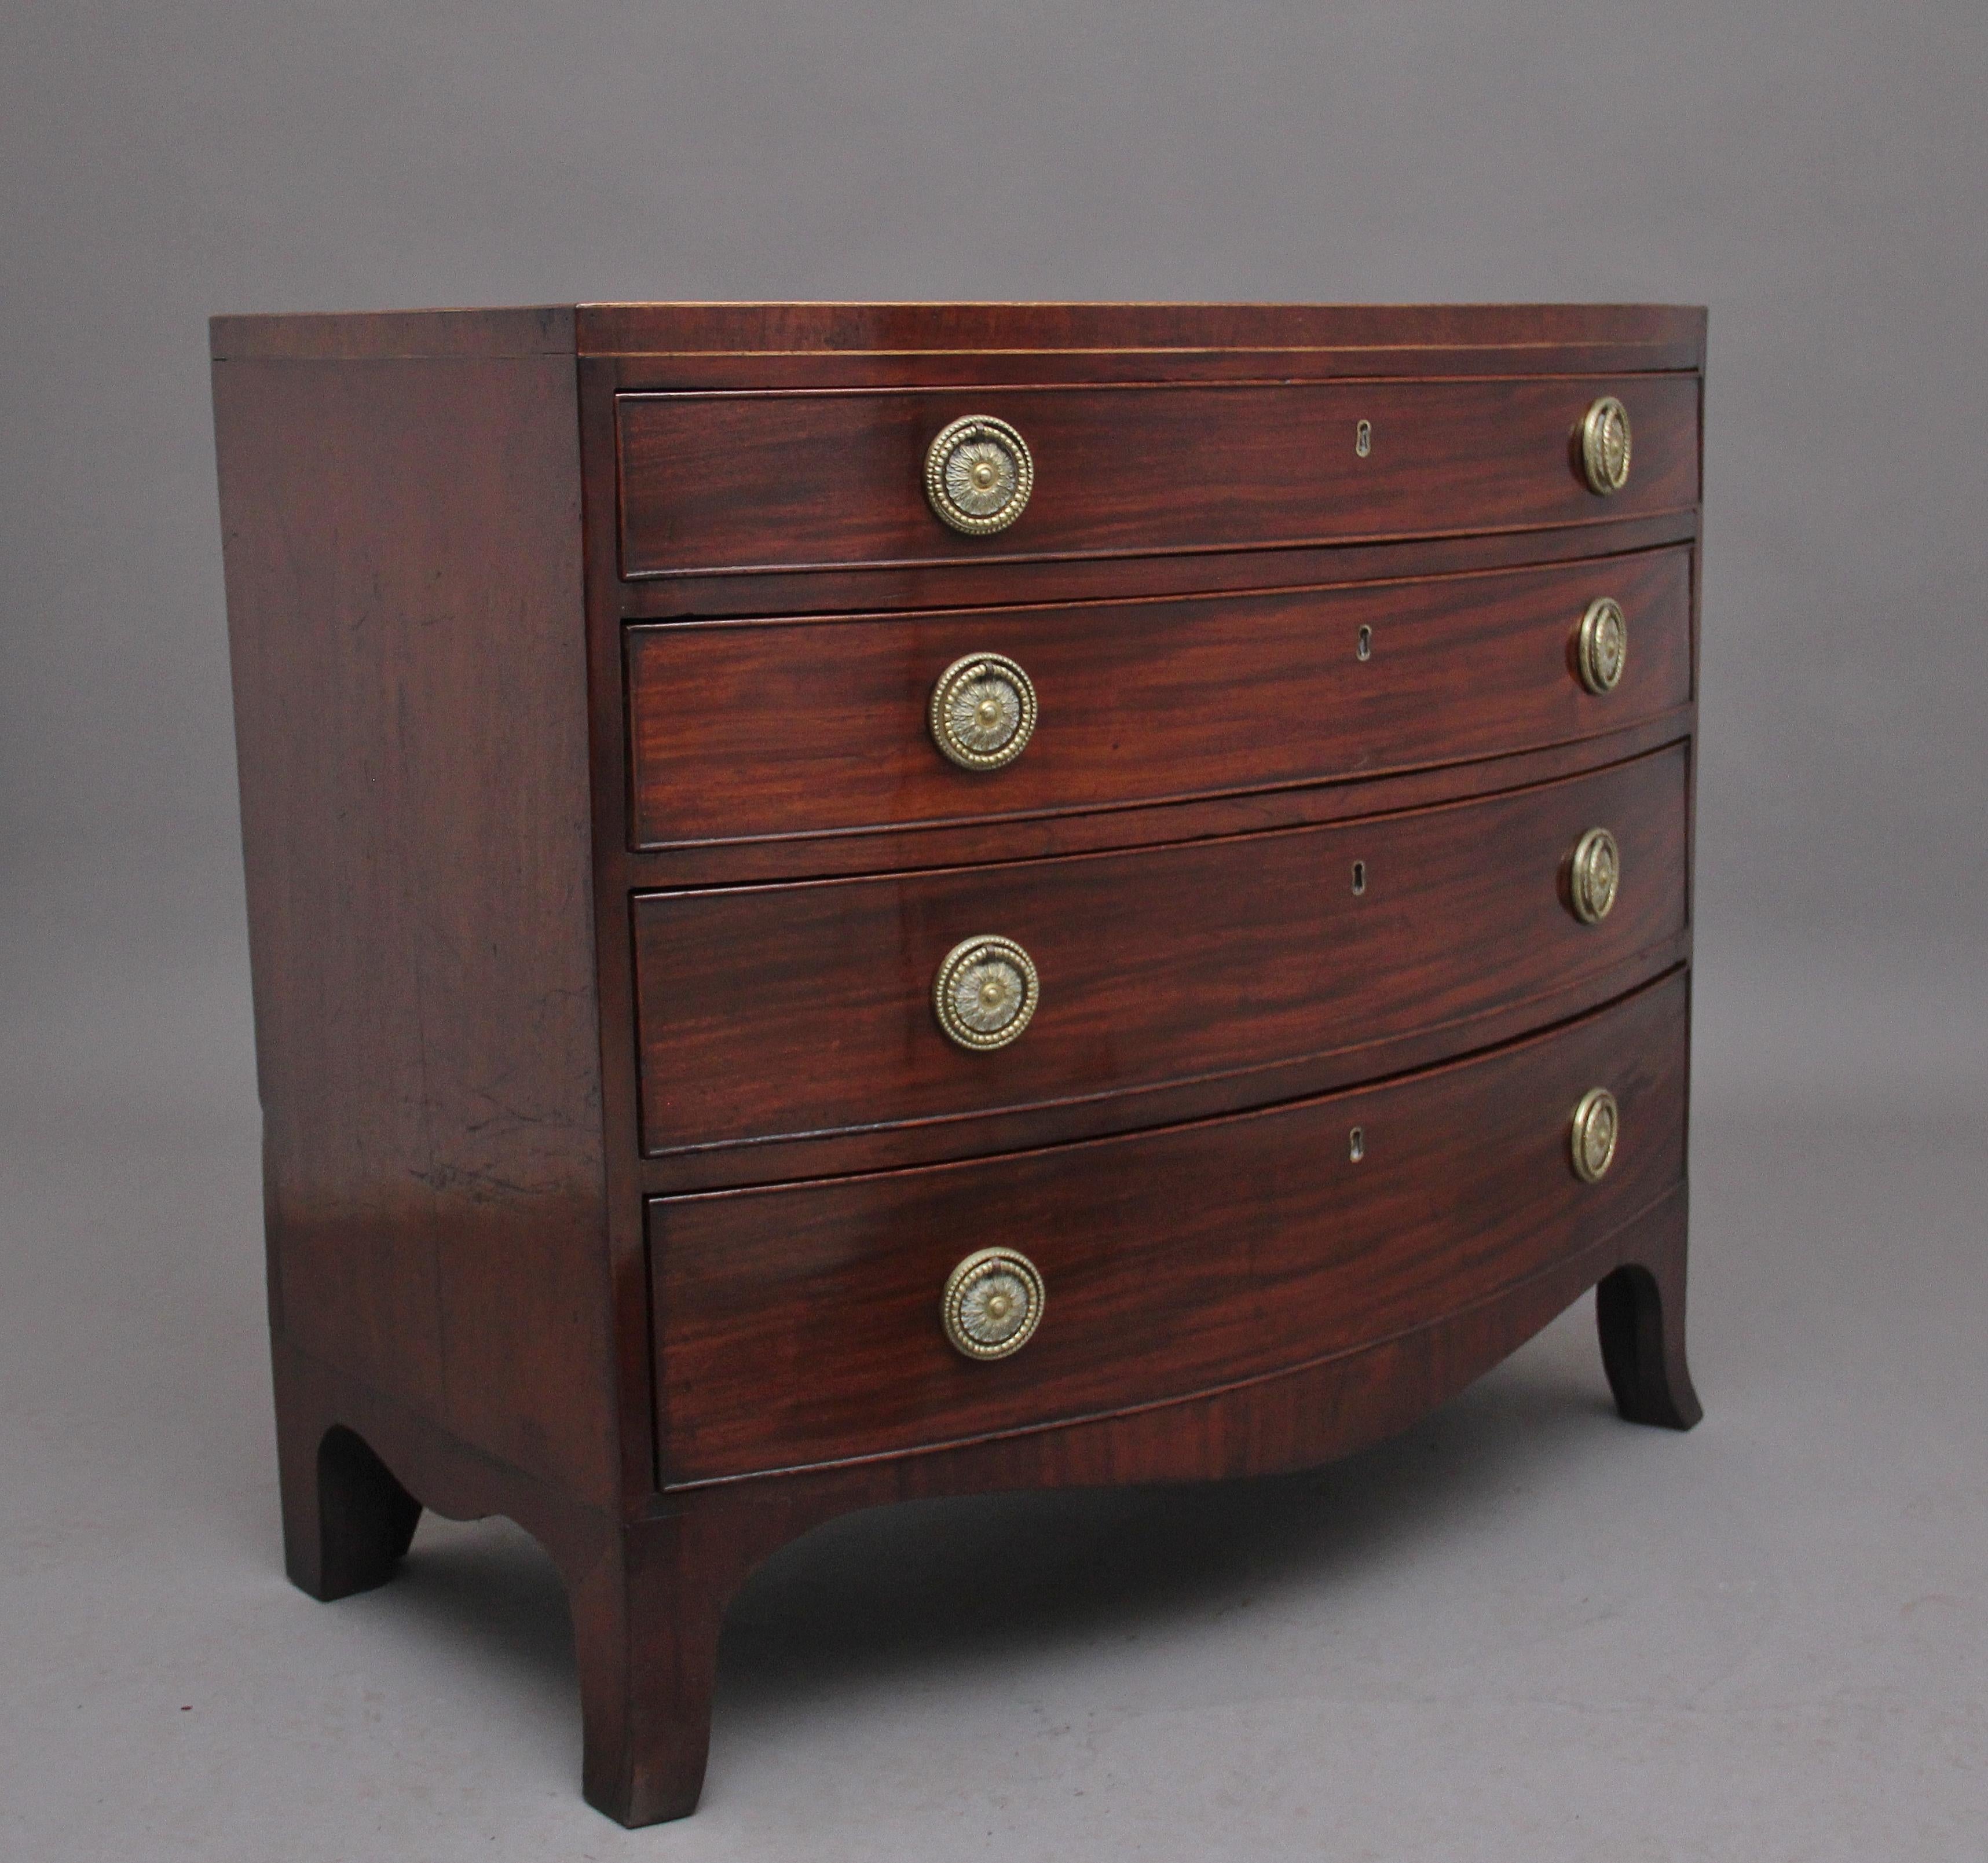 Early 19th Century mahogany bowfront chest of drawers of nice proportions, having a lovely figured top above a selection four long oak lined graduated drawers, with brass engraved ring and plate handles, shaped apron on the front and sides,